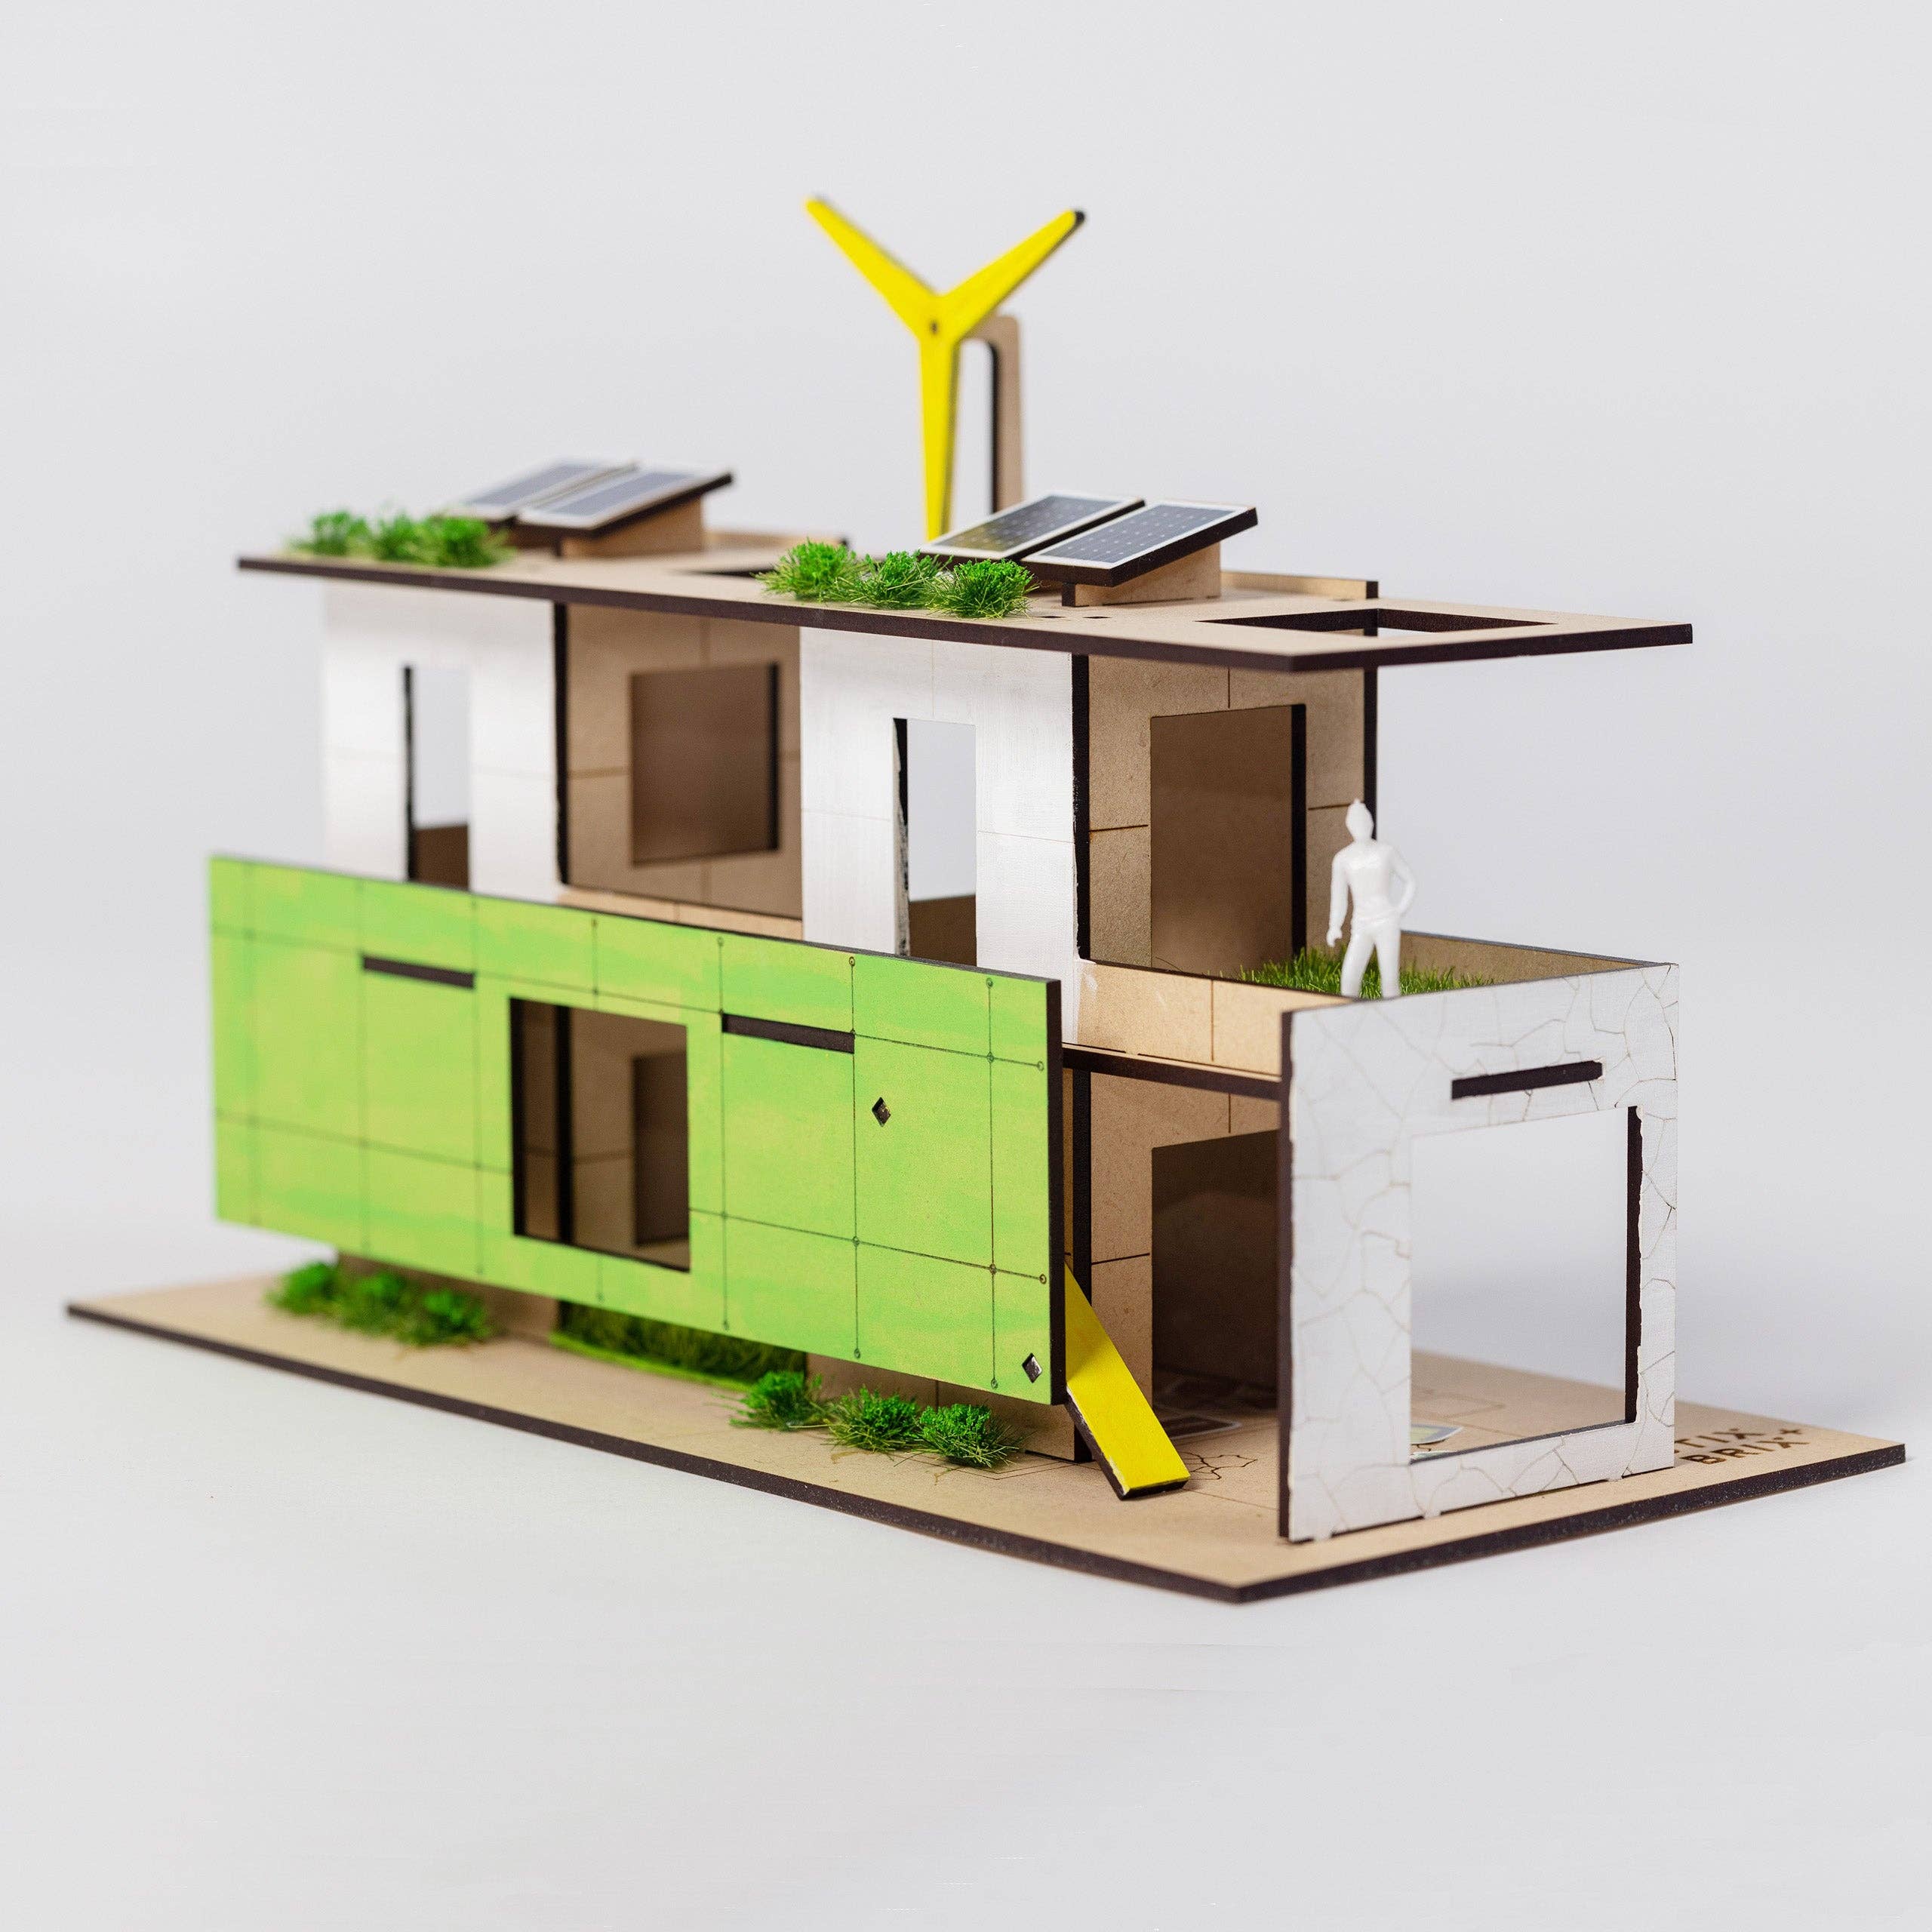 ECO-HOUSE Architectural Model Building Kit